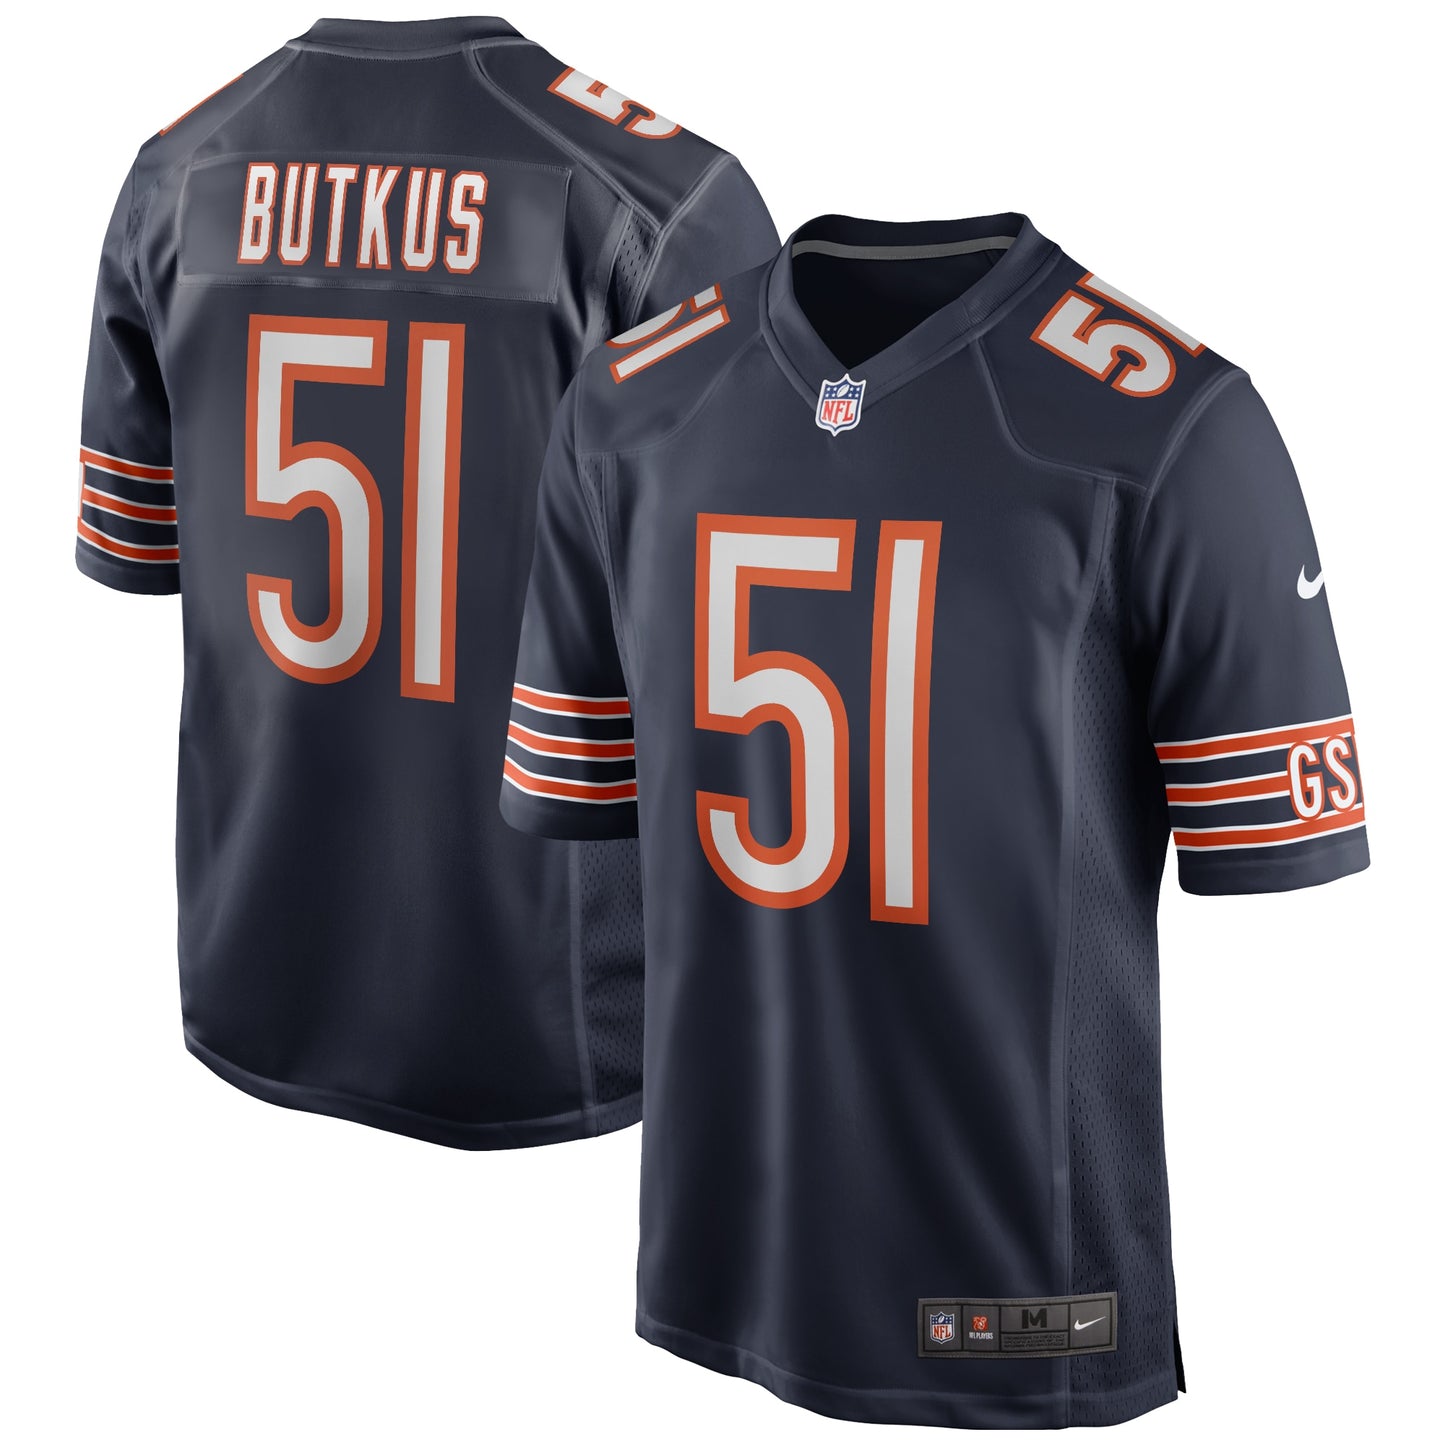 Dick Butkus Chicago Bears Nike Game Retired Player Jersey - Navy